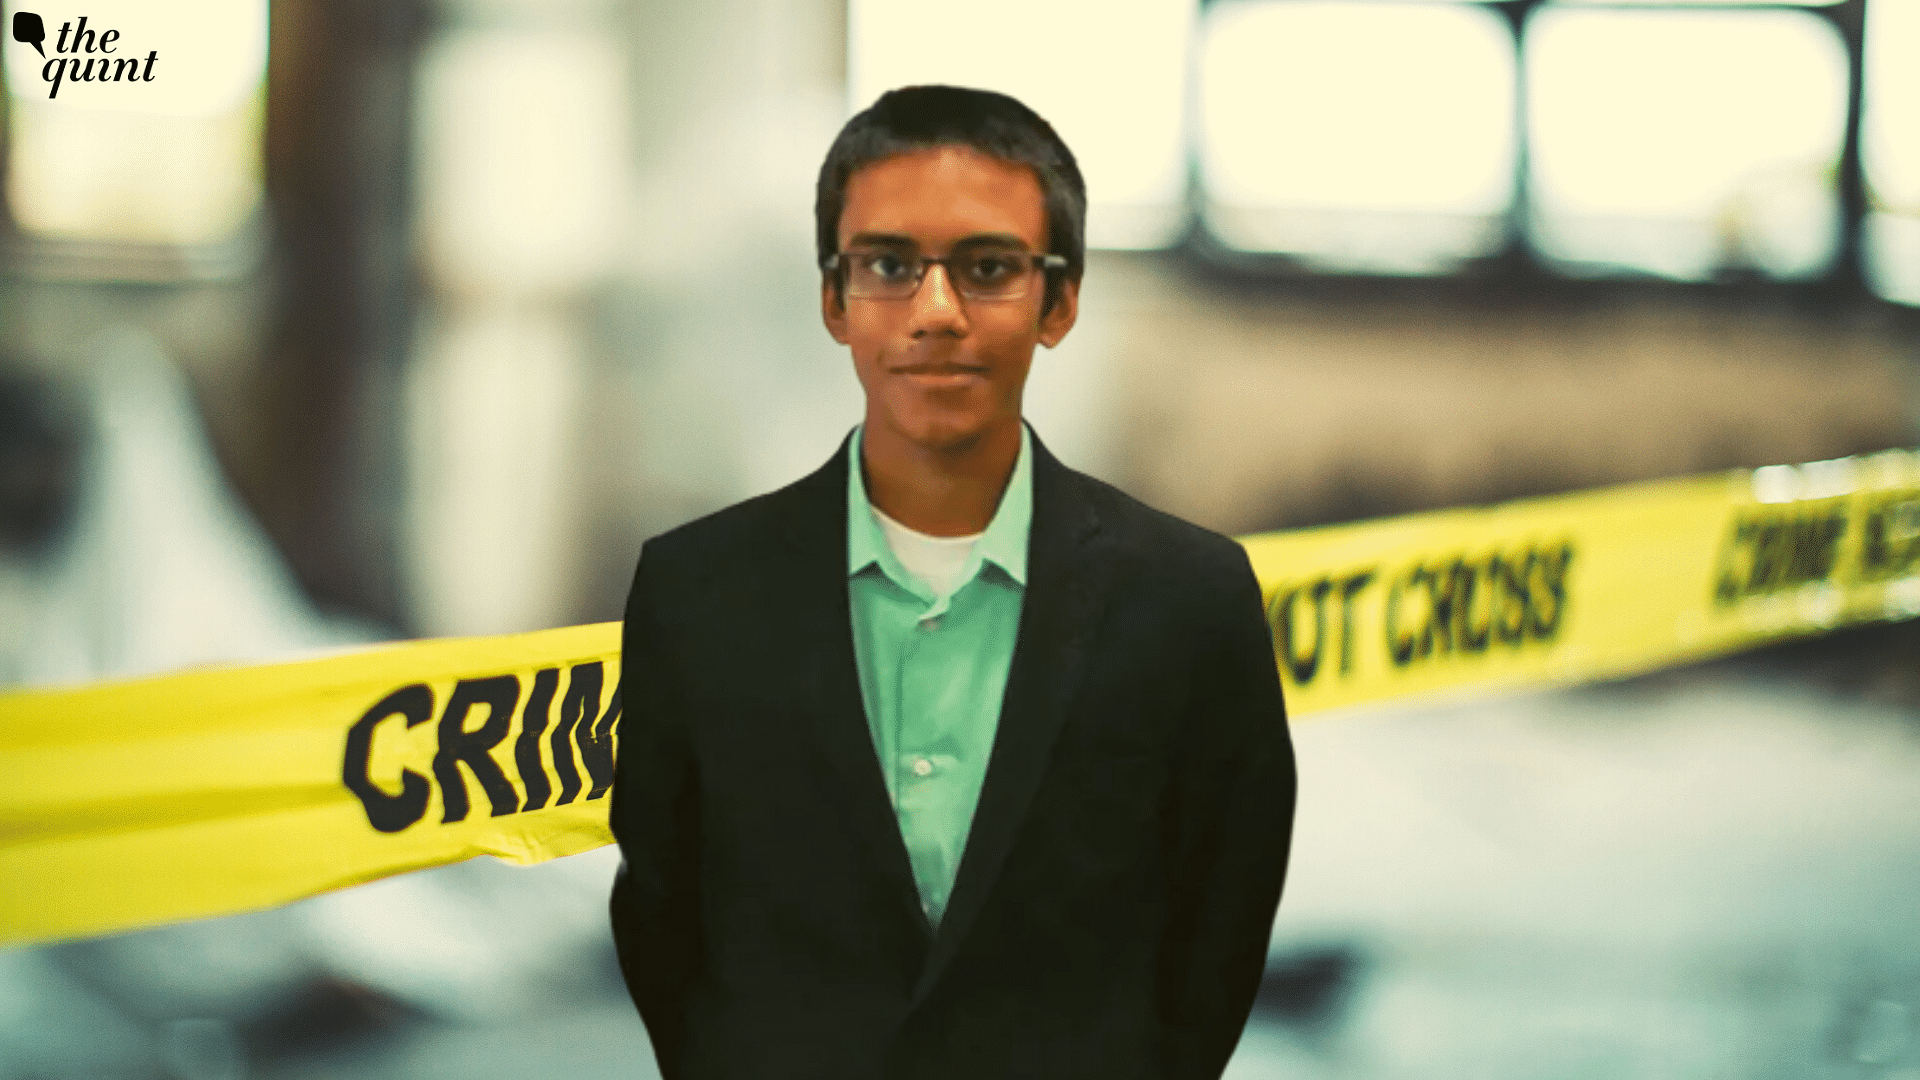 <div class="paragraphs"><p>Varun Manish Chheda, a data science senior from Indianapolis, was found dead in McCutcheon Hall on the western edge of the university campus</p></div>